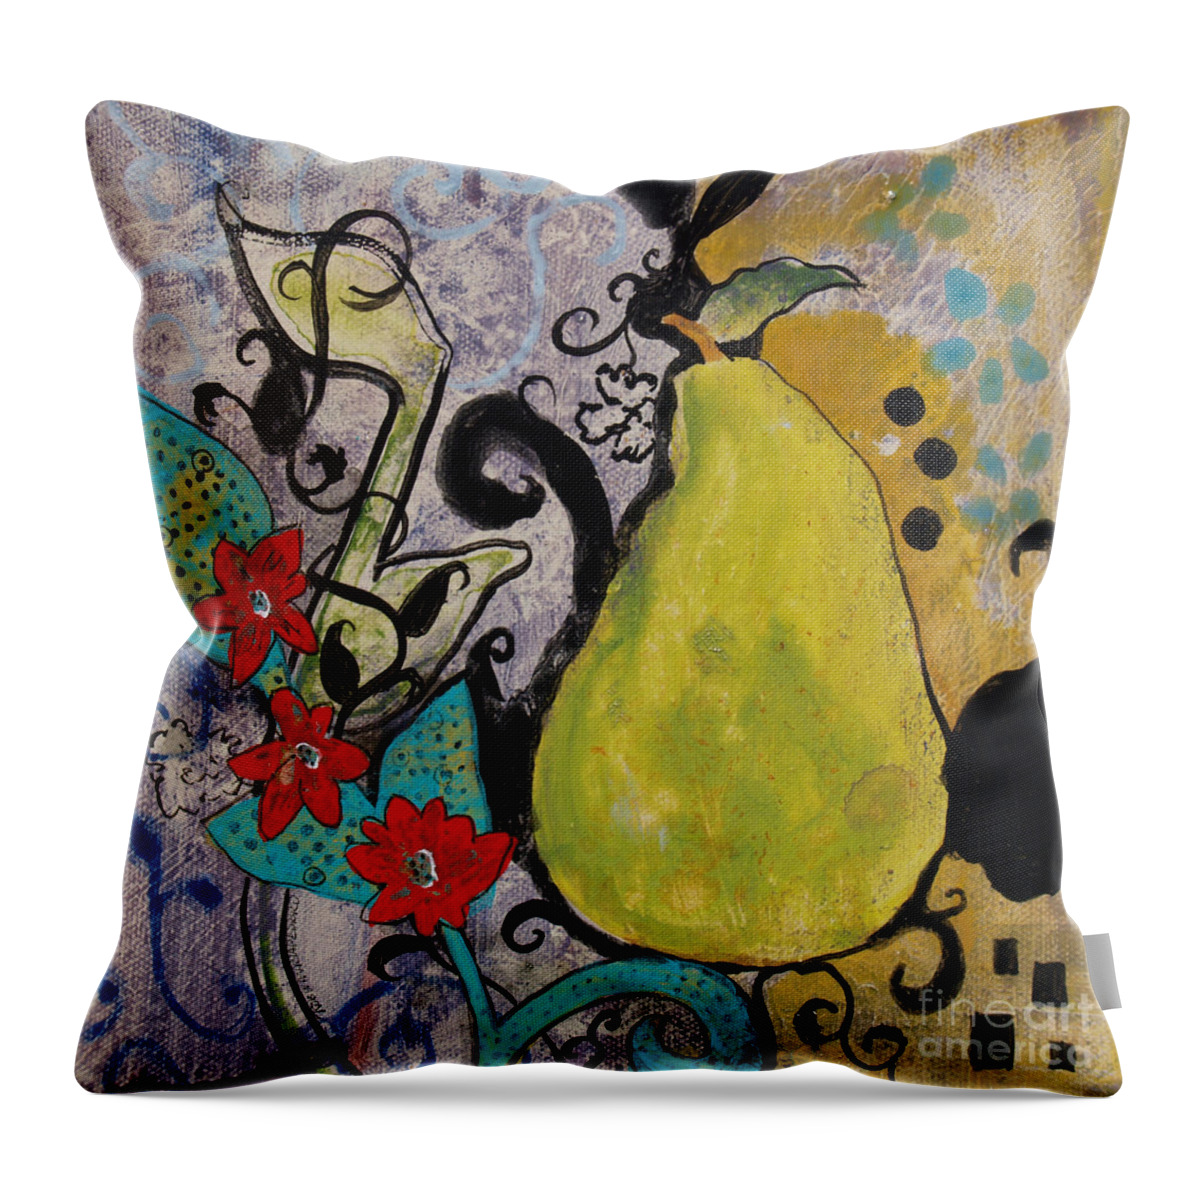 Pear Throw Pillow featuring the painting Enchanted Pear by Robin Pedrero